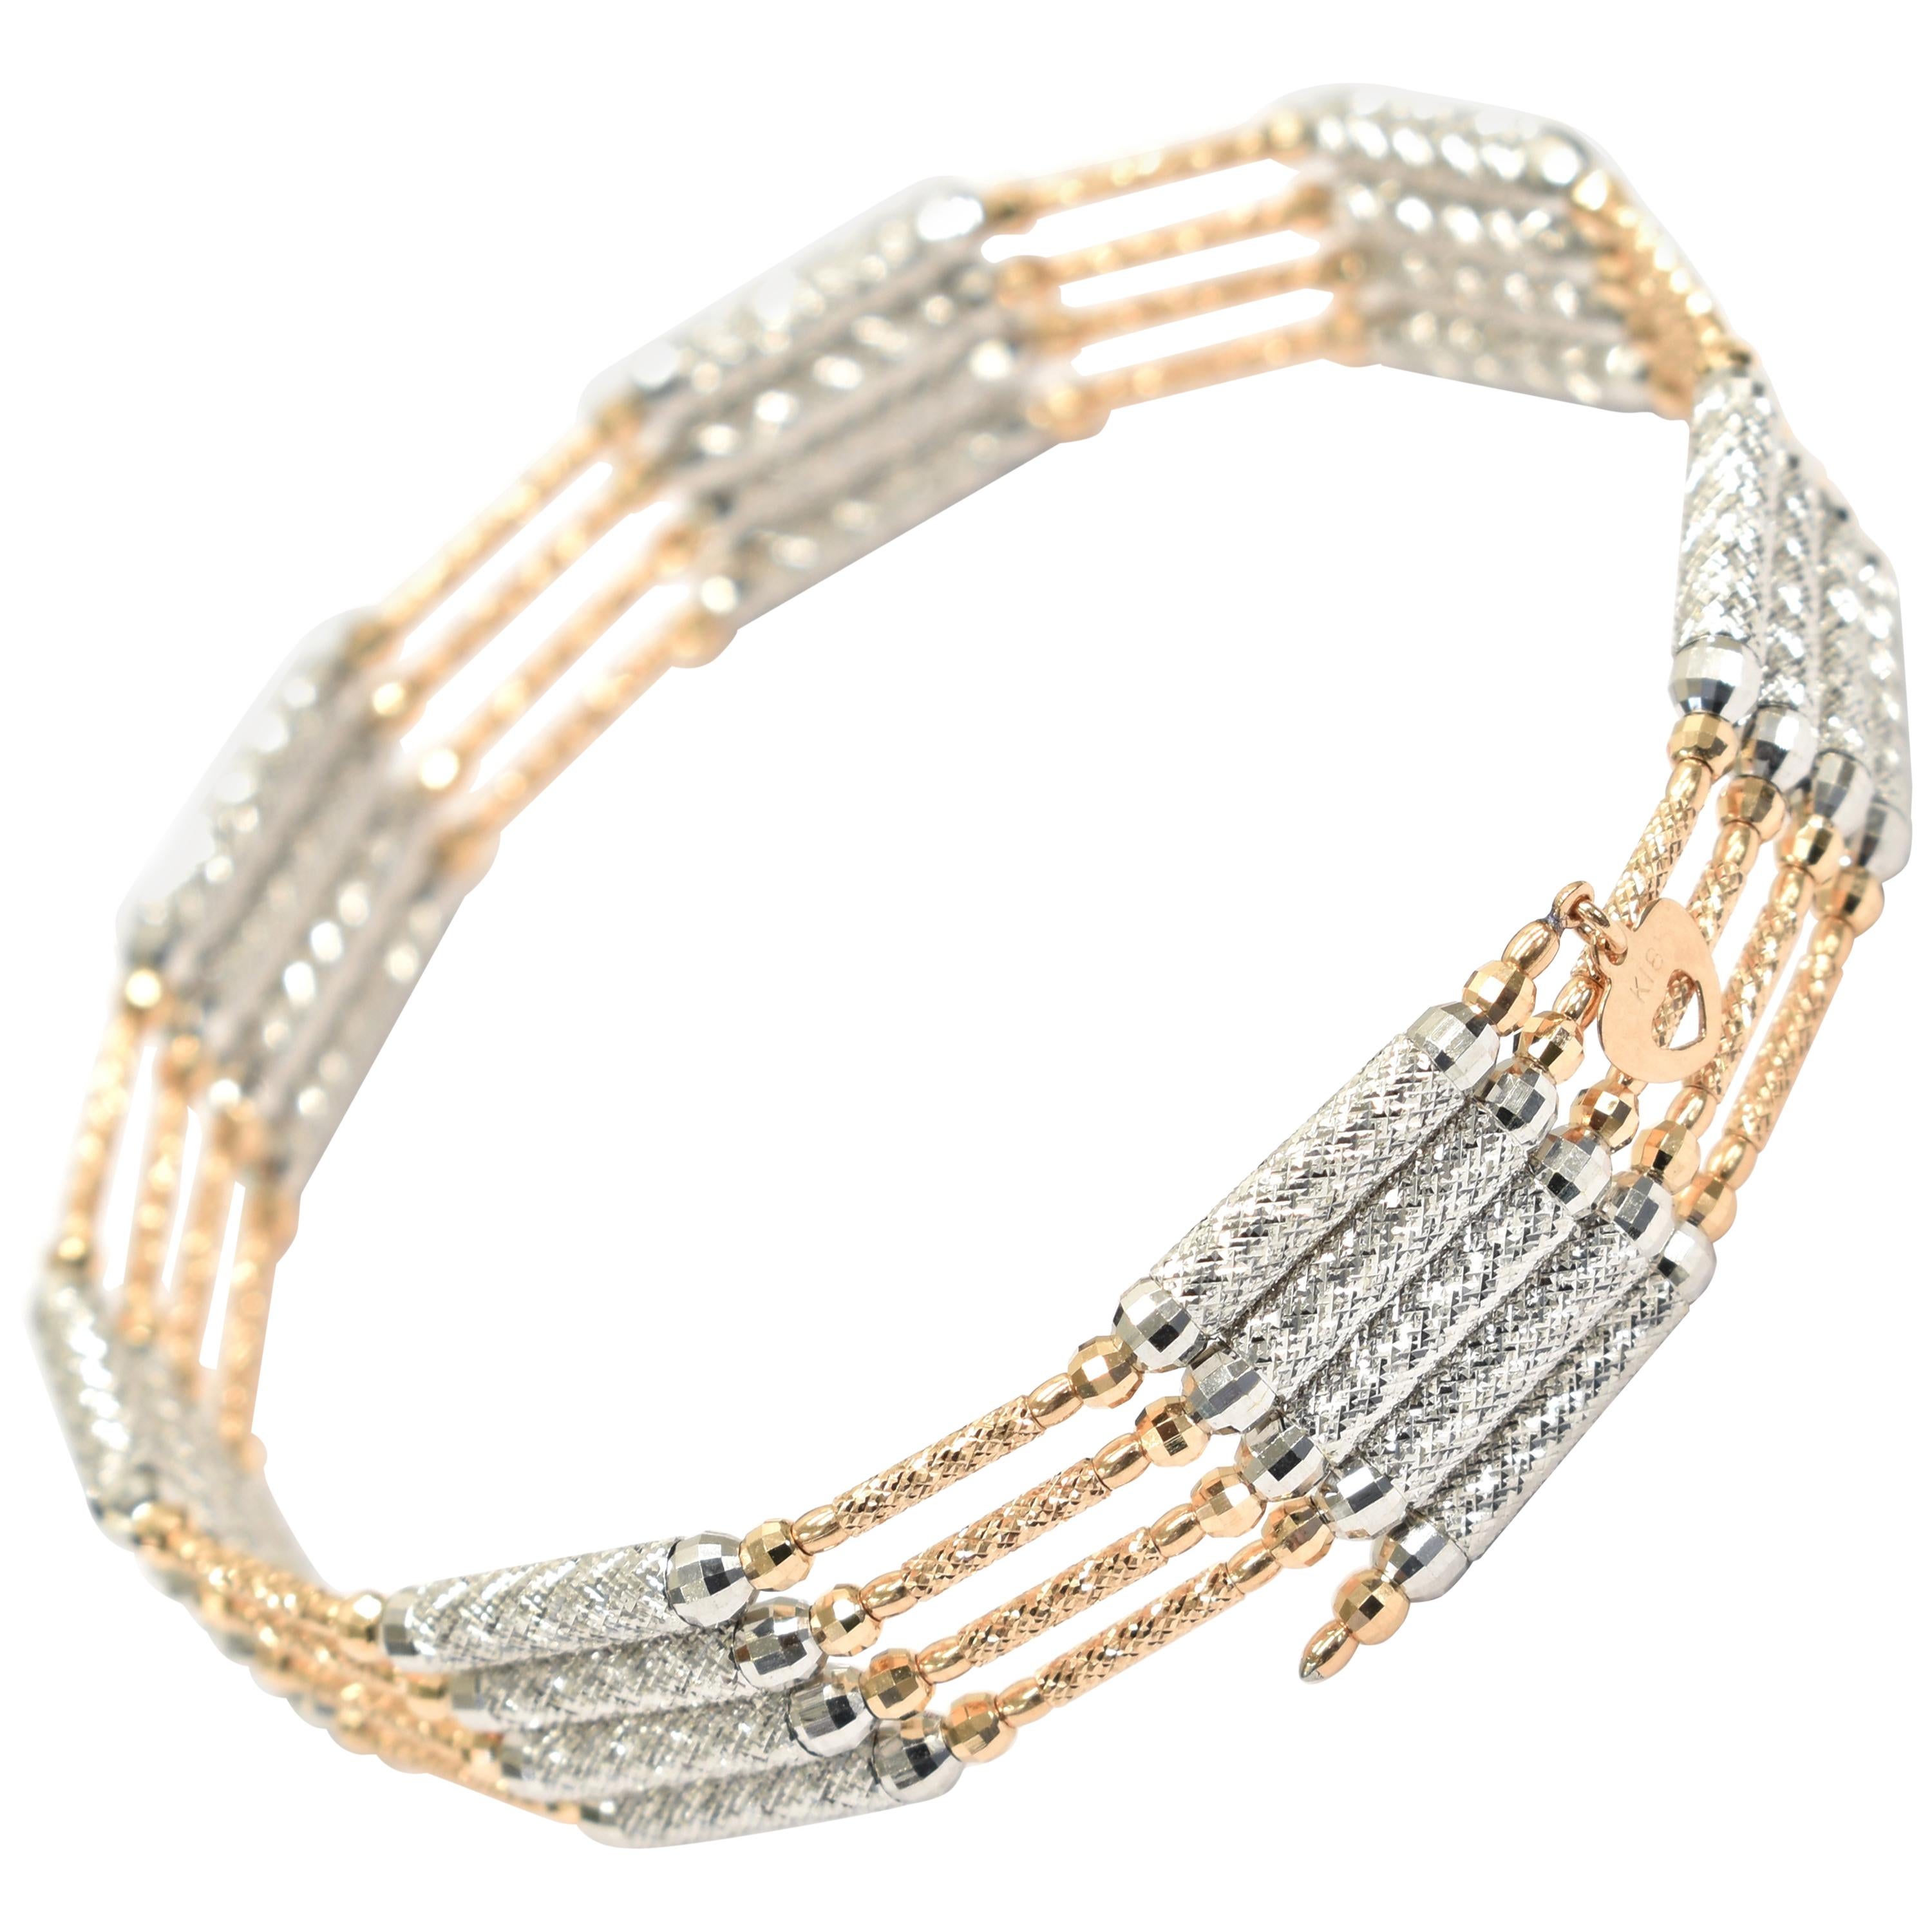 Multi Purpose Magnetic Bracelet/Necklace Made in 18 Karat White and Rose Gold For Sale